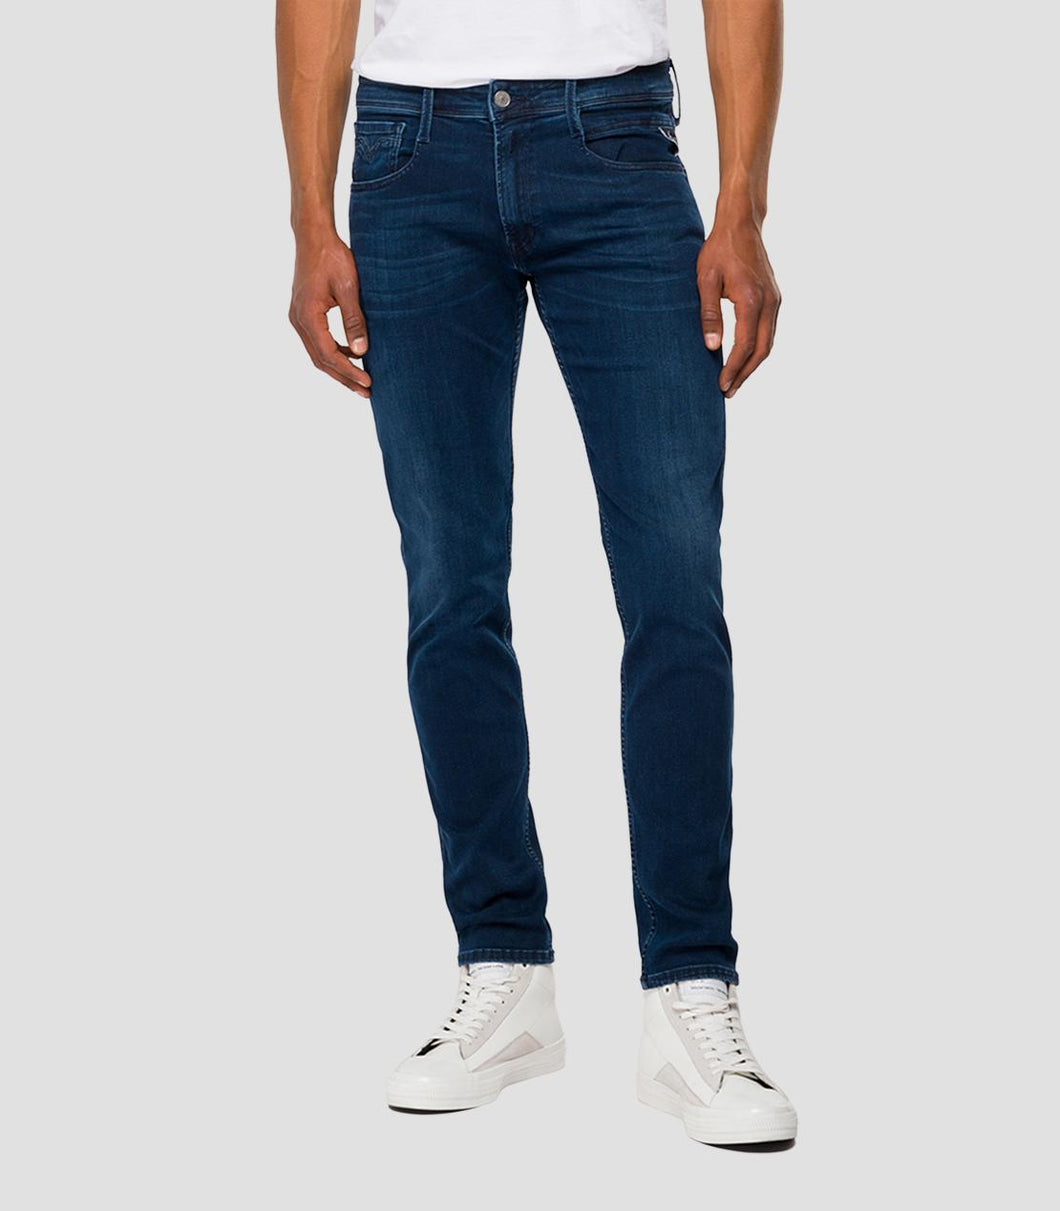 Replay Anbass Slim Fit Jeans, M914Y 41A 90A 007